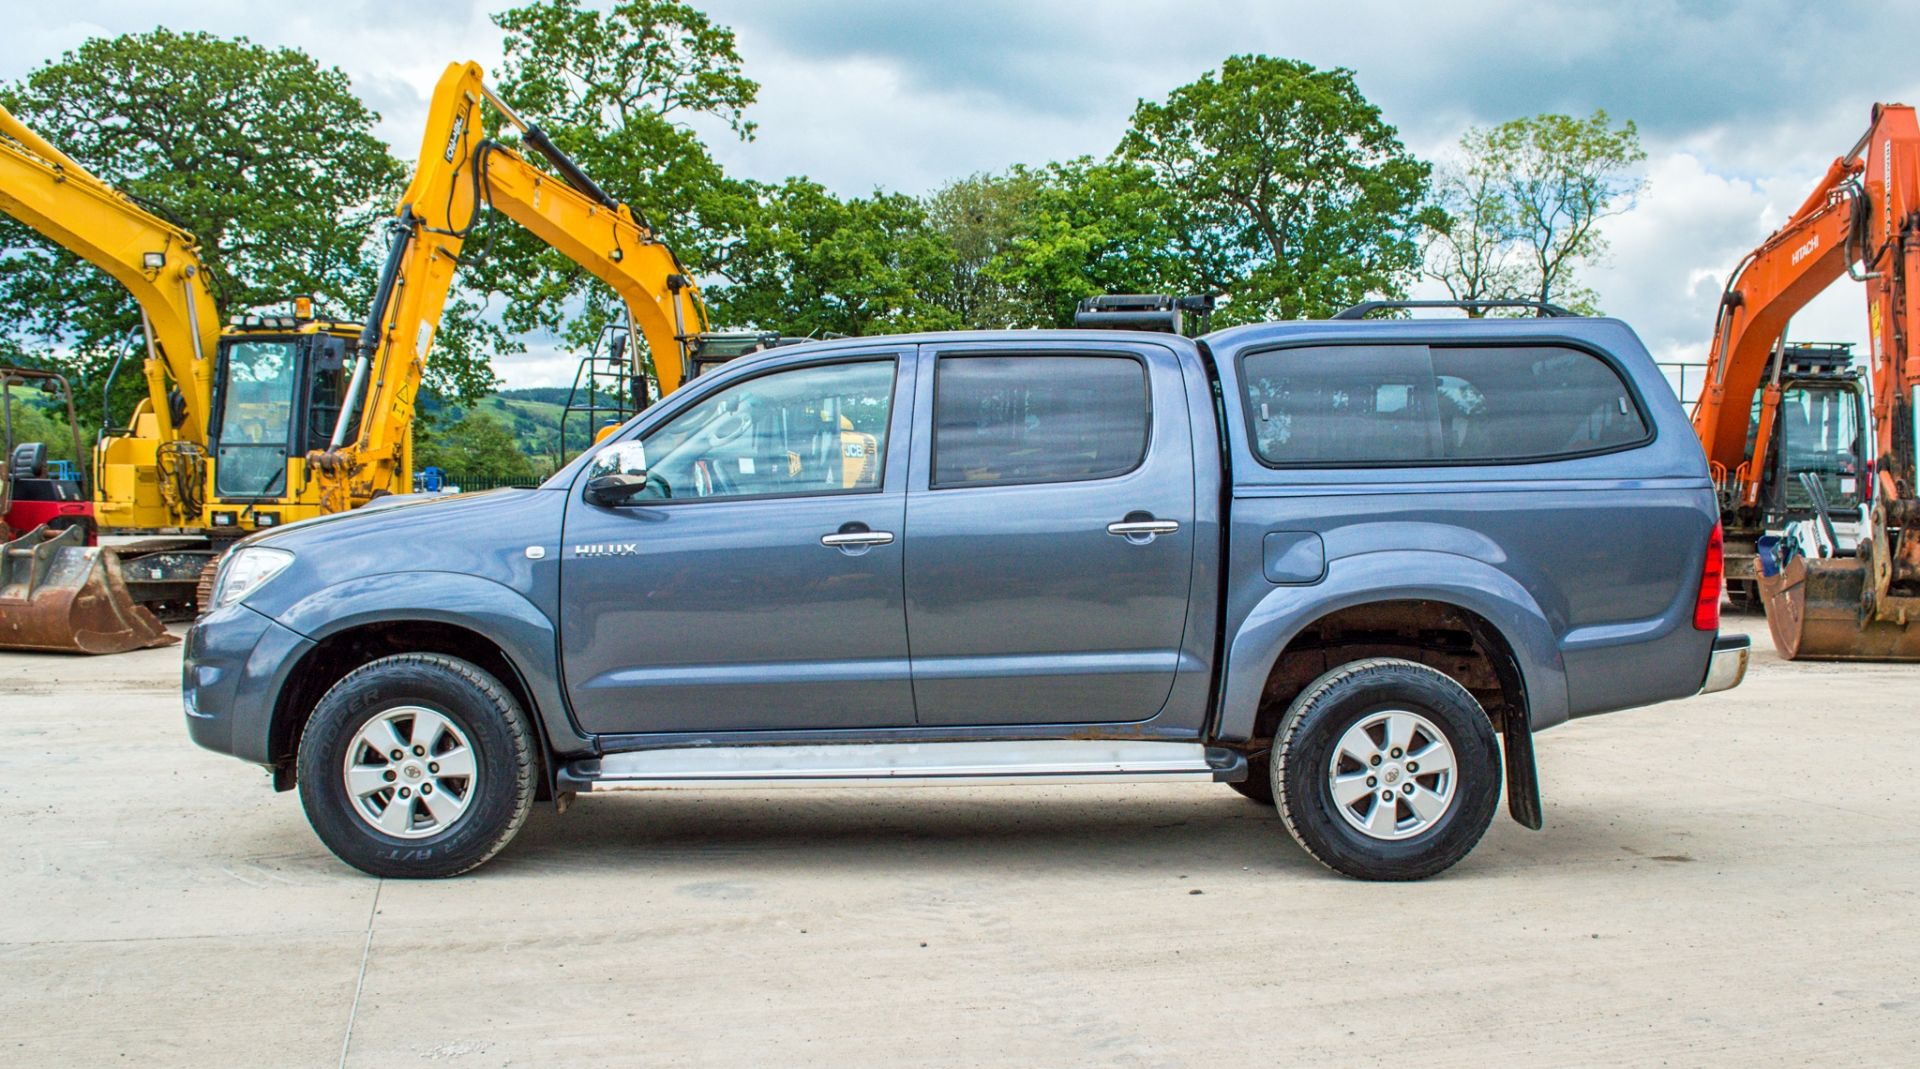 Toyota Hilux 2.5 D-4D 144 HL3 4wd manual double cab pick up Reg No: ST10 AOW Date of Registration: - Image 7 of 25